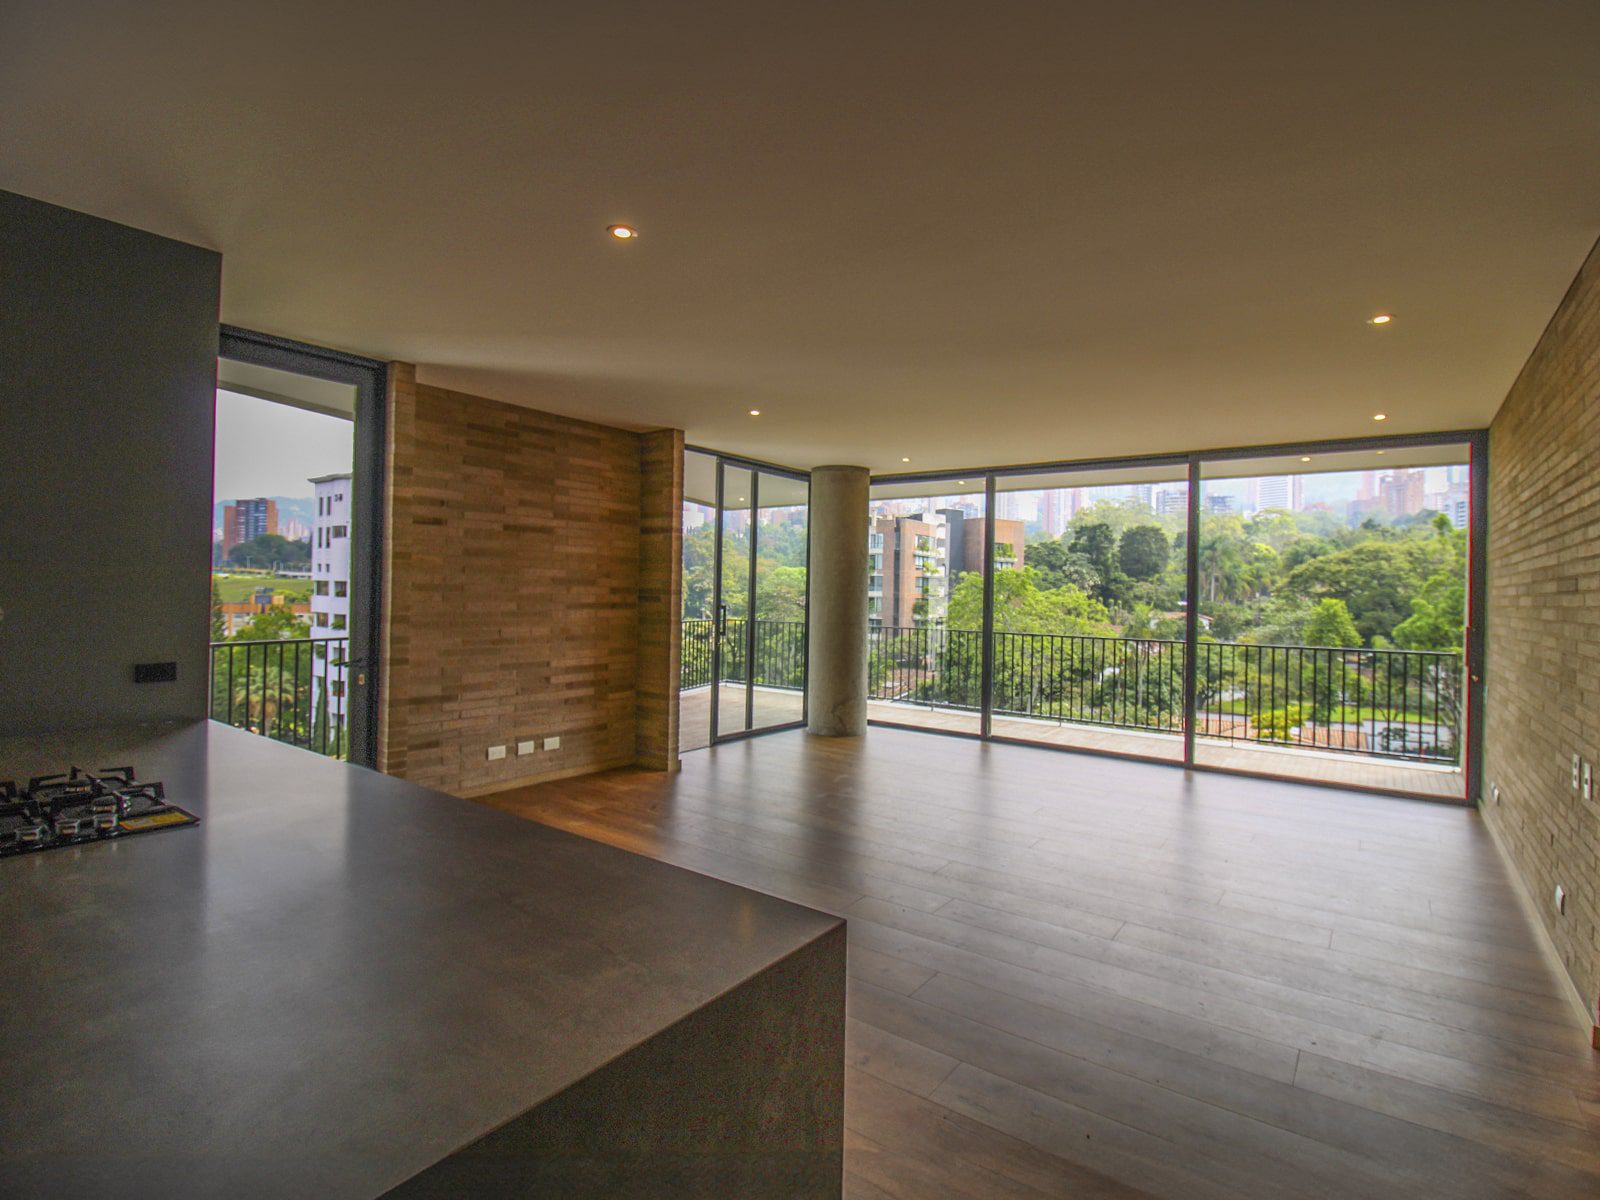 New Construction El Poblado Bachelor Pad with Huge Private Terrace and Panoramic Views